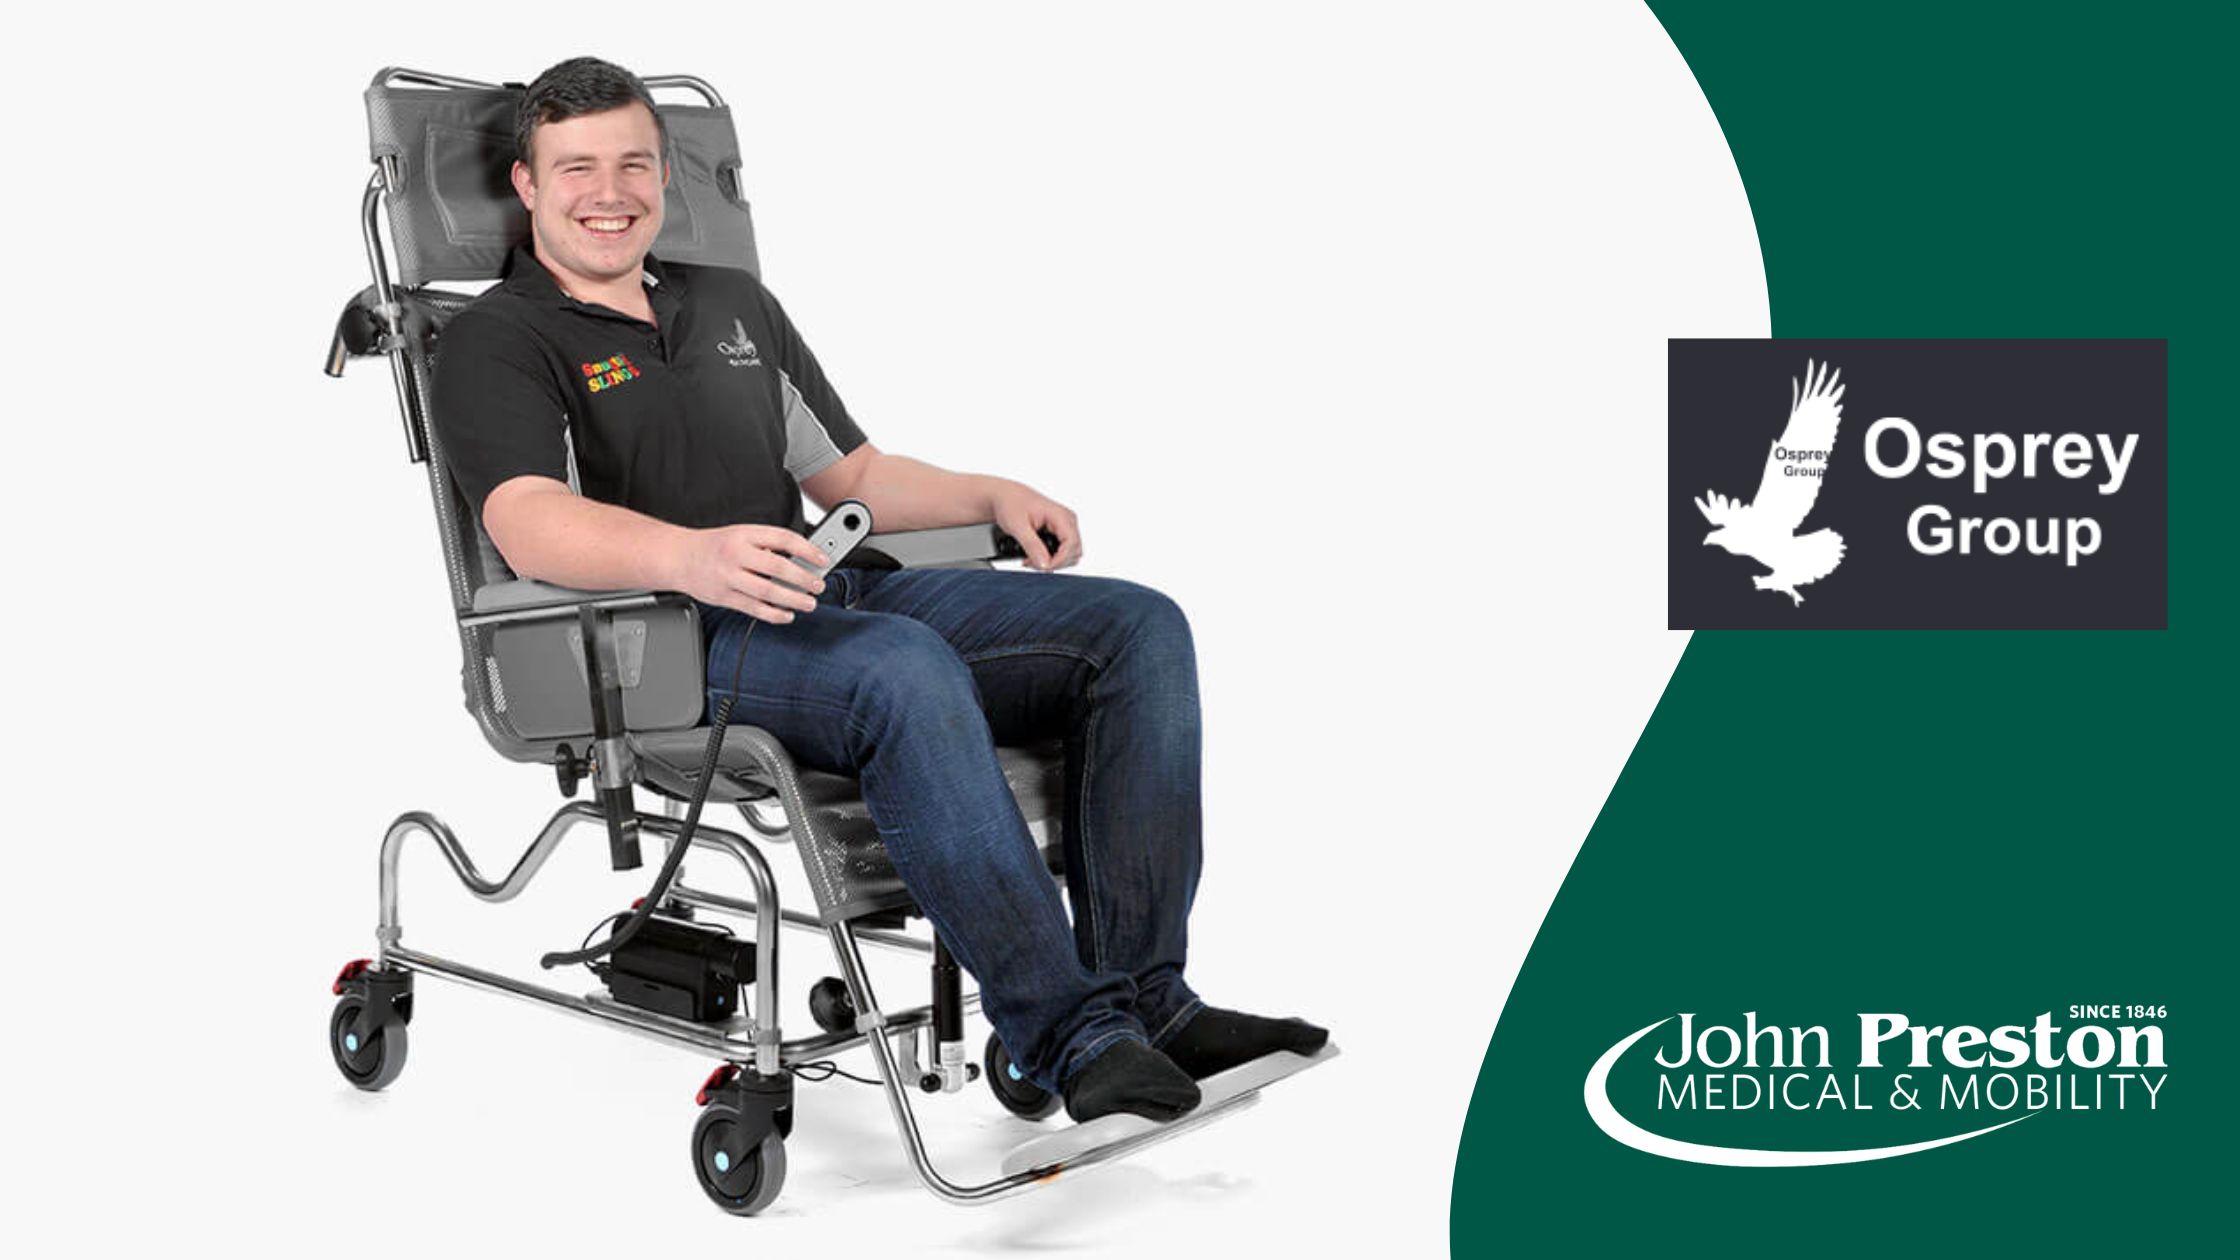 New range of shower chairs and shower cradles from The Osprey Group